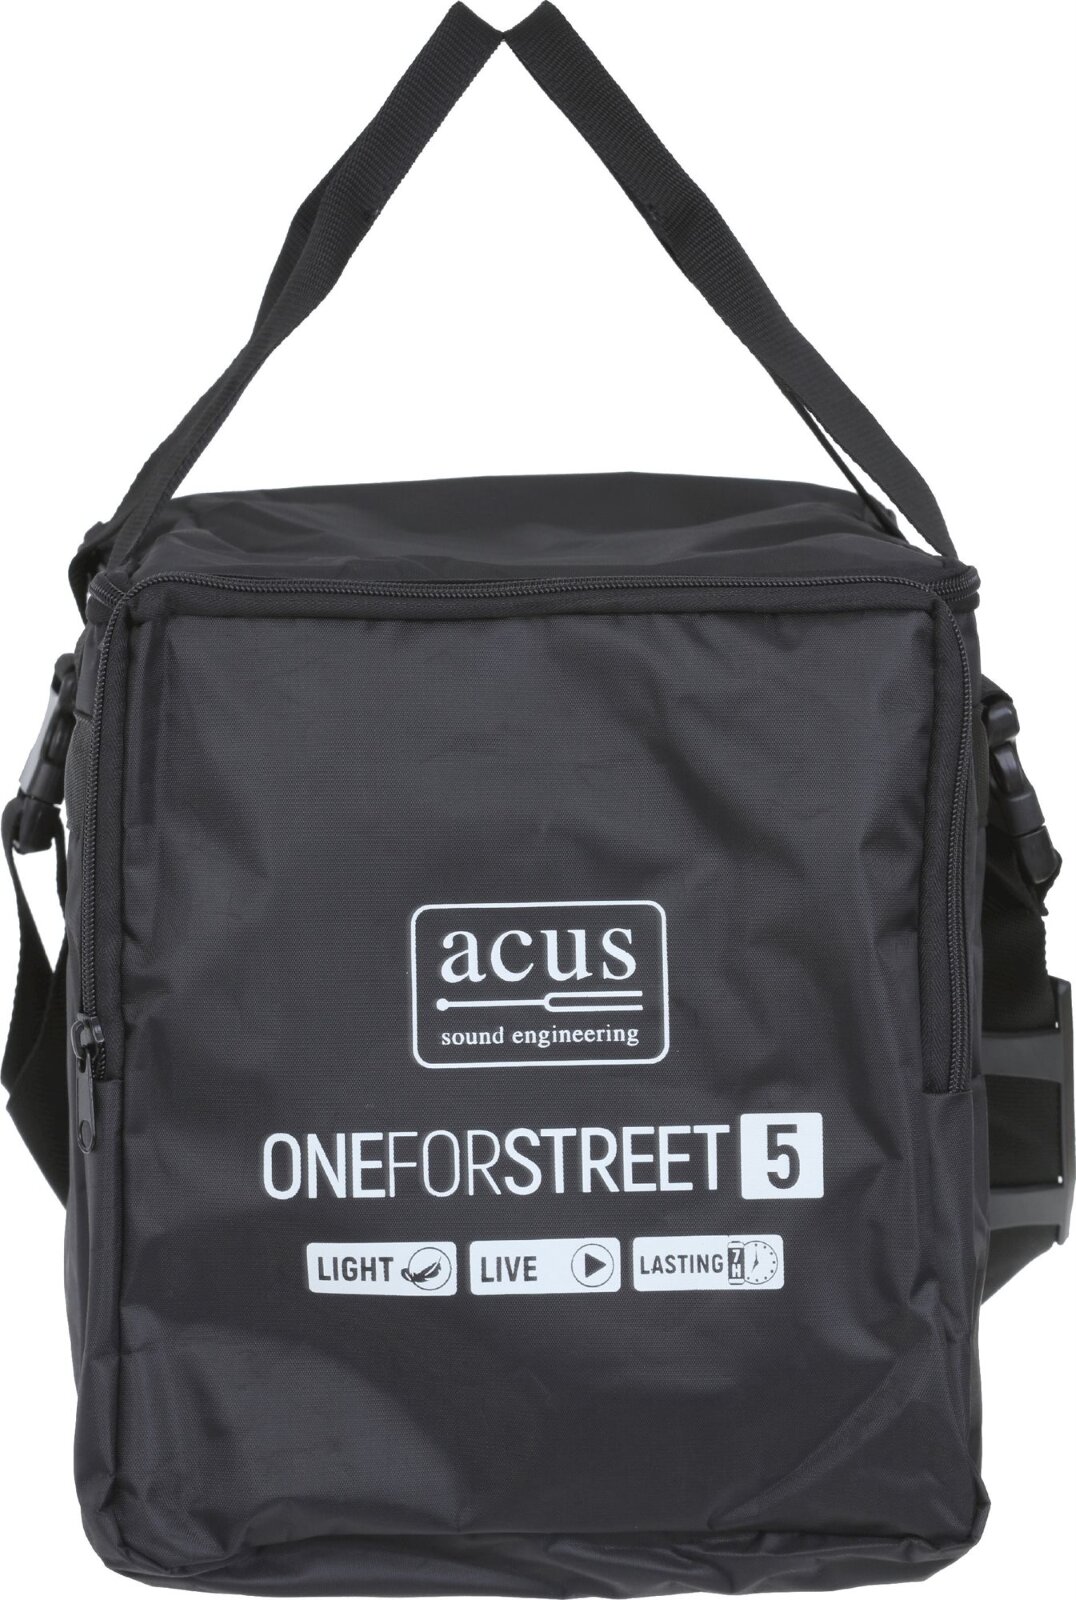 ACUS One for Street 5 BAG : photo 1